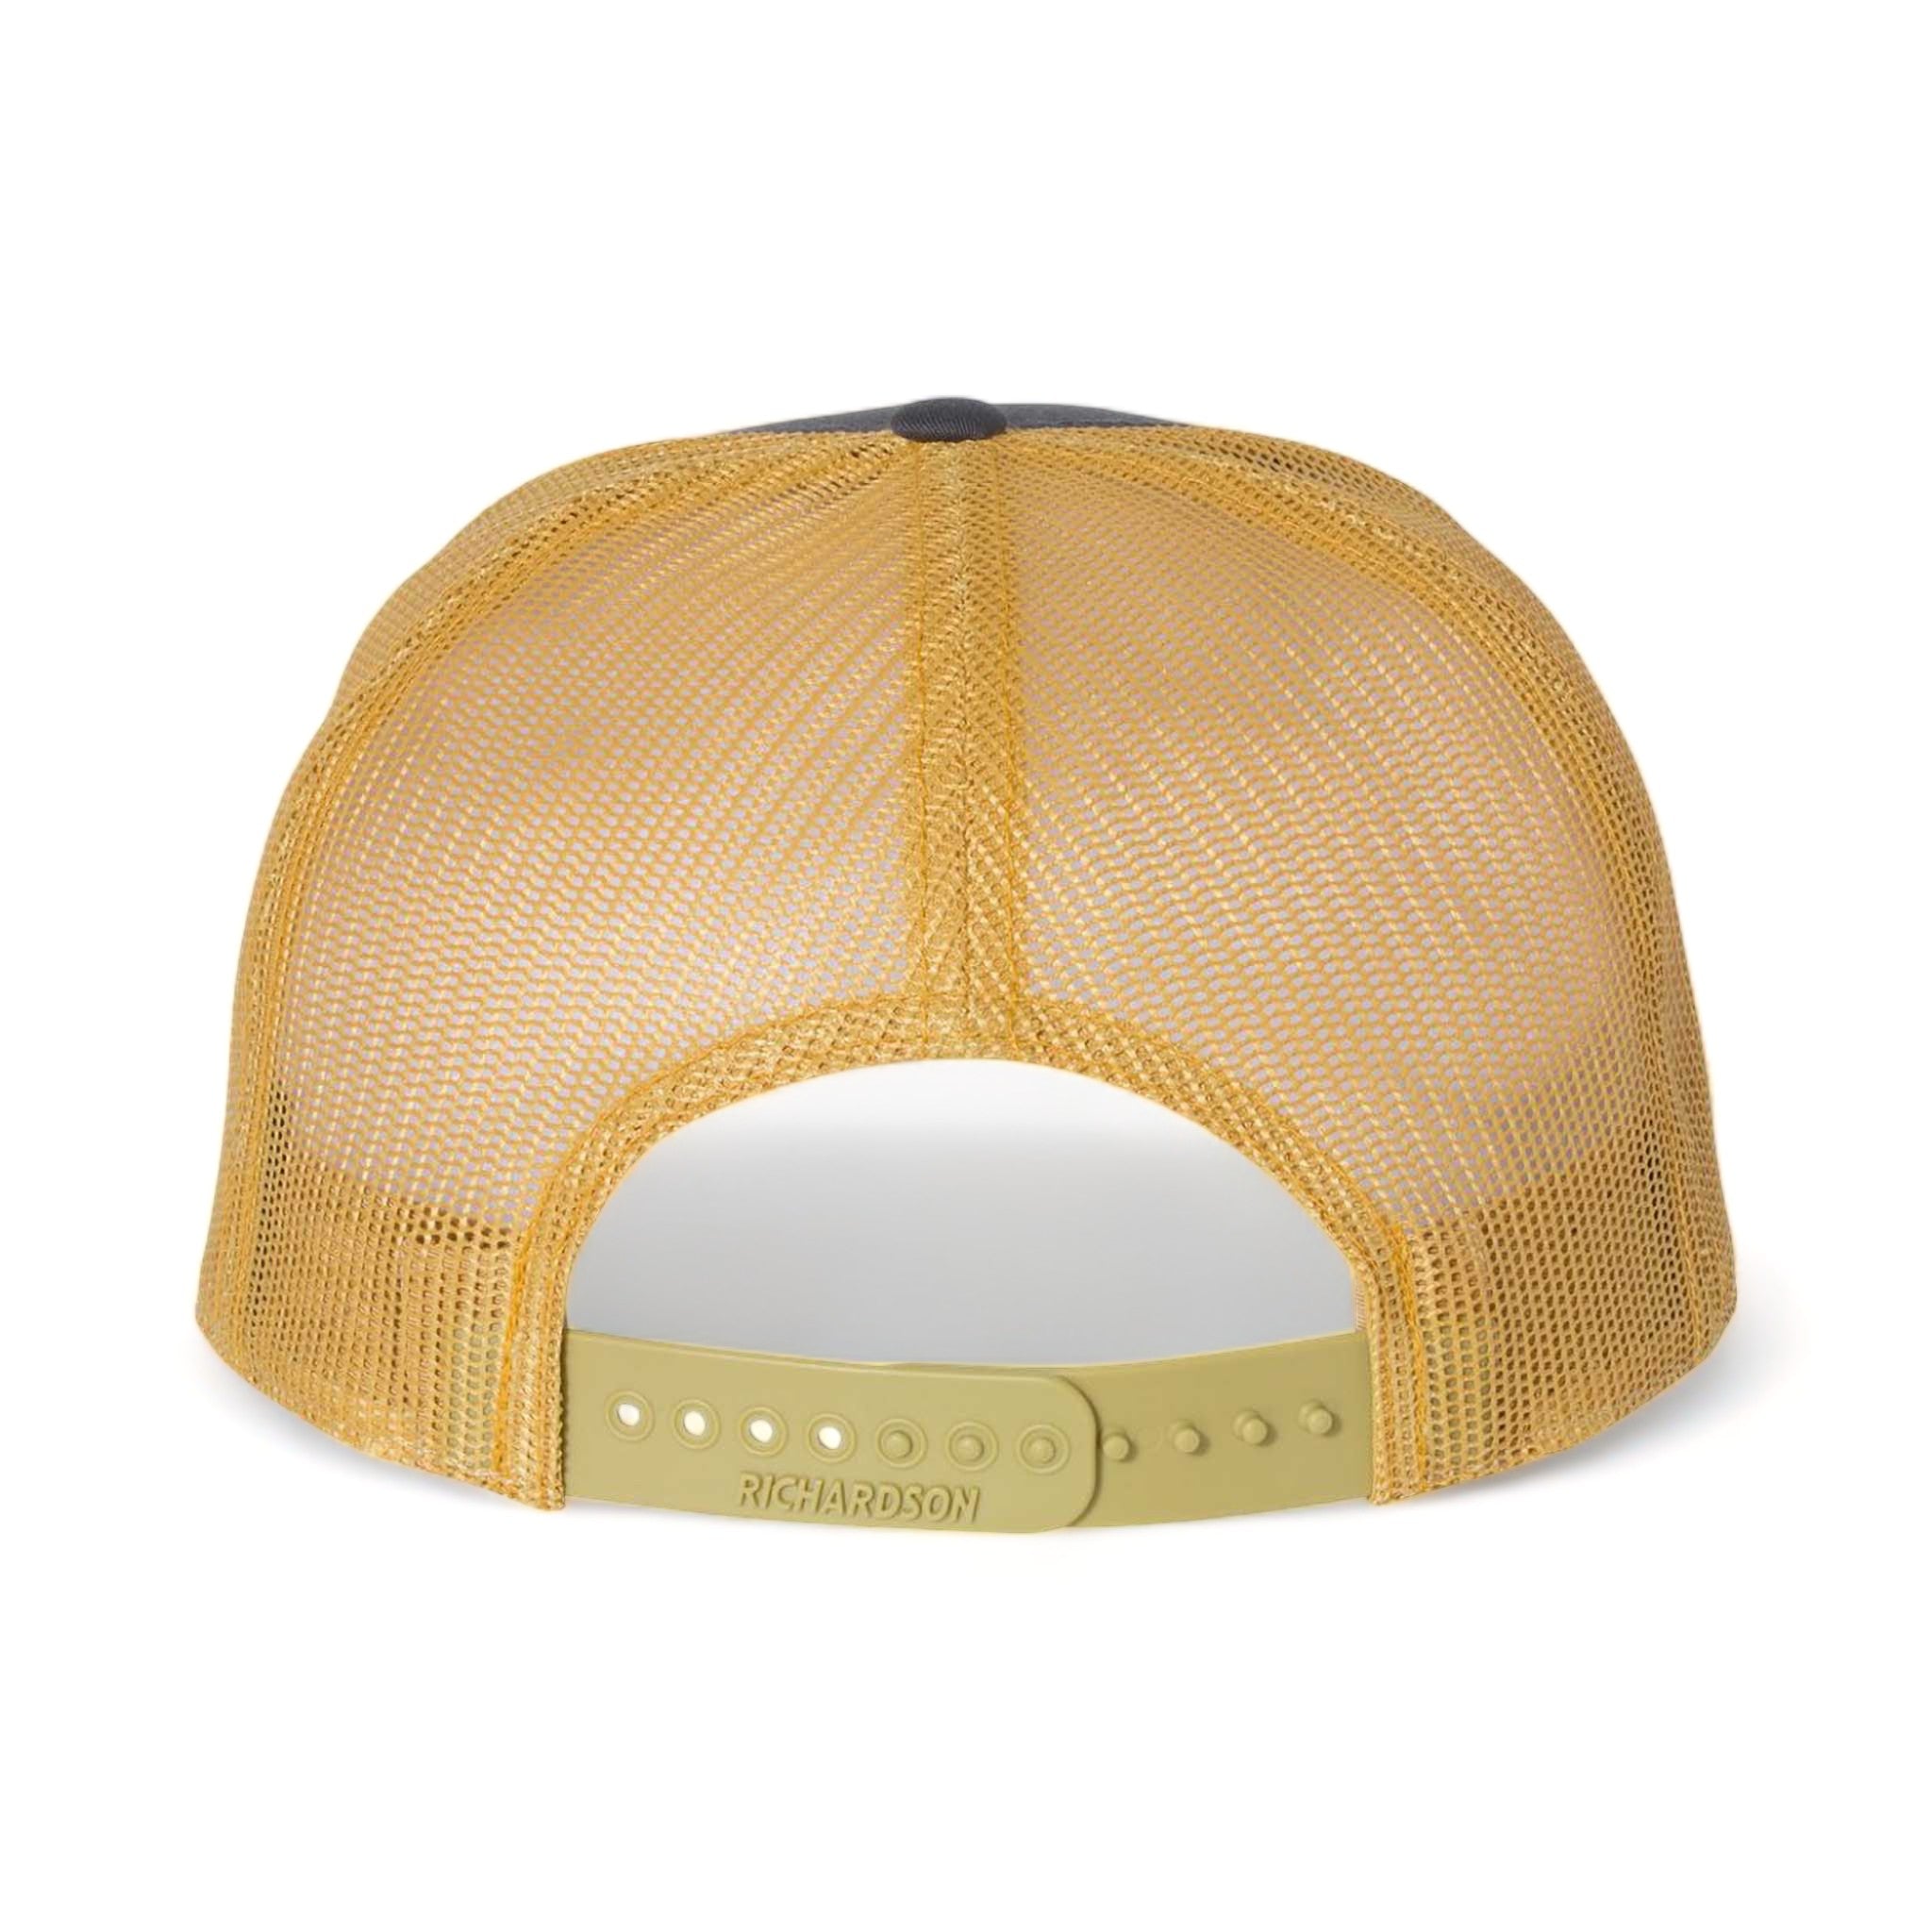 Back view of Richardson 168 custom hat in charcoal and old gold